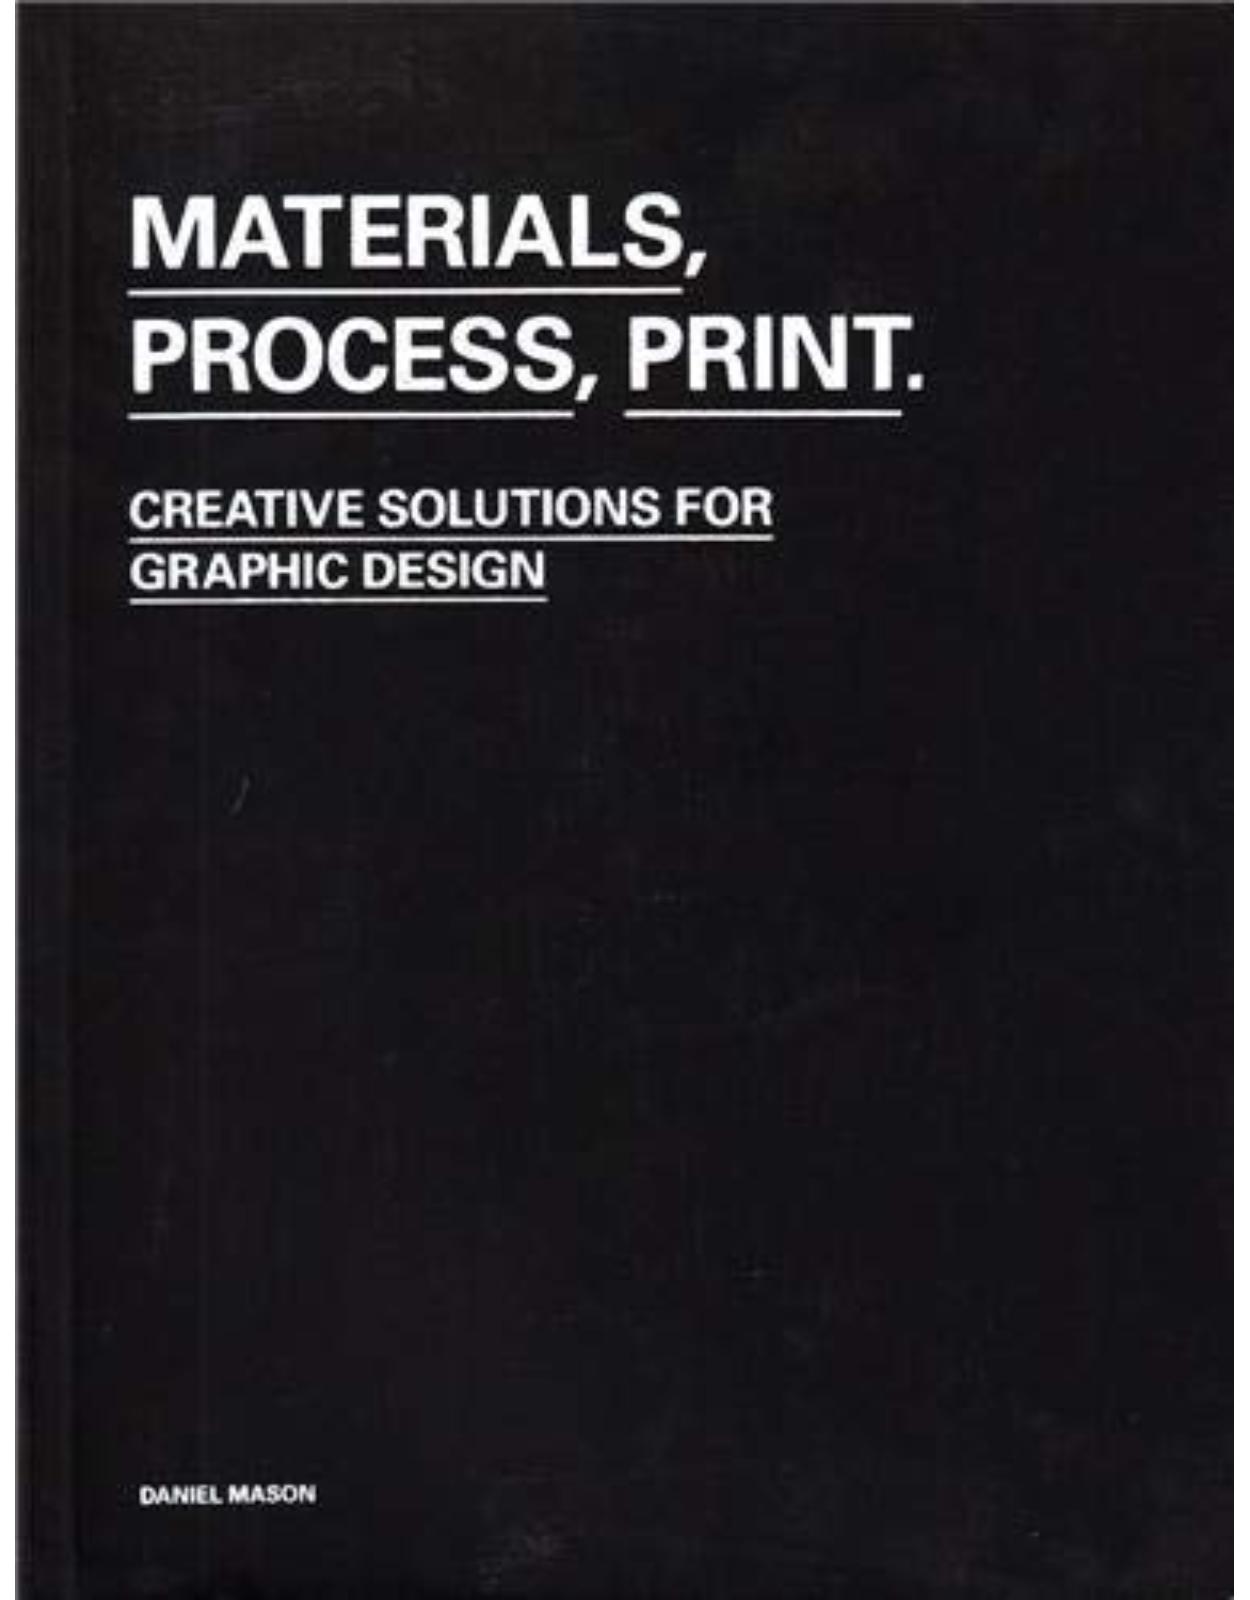 Materials, Process, Print: Creative Solutions for Graphic Design